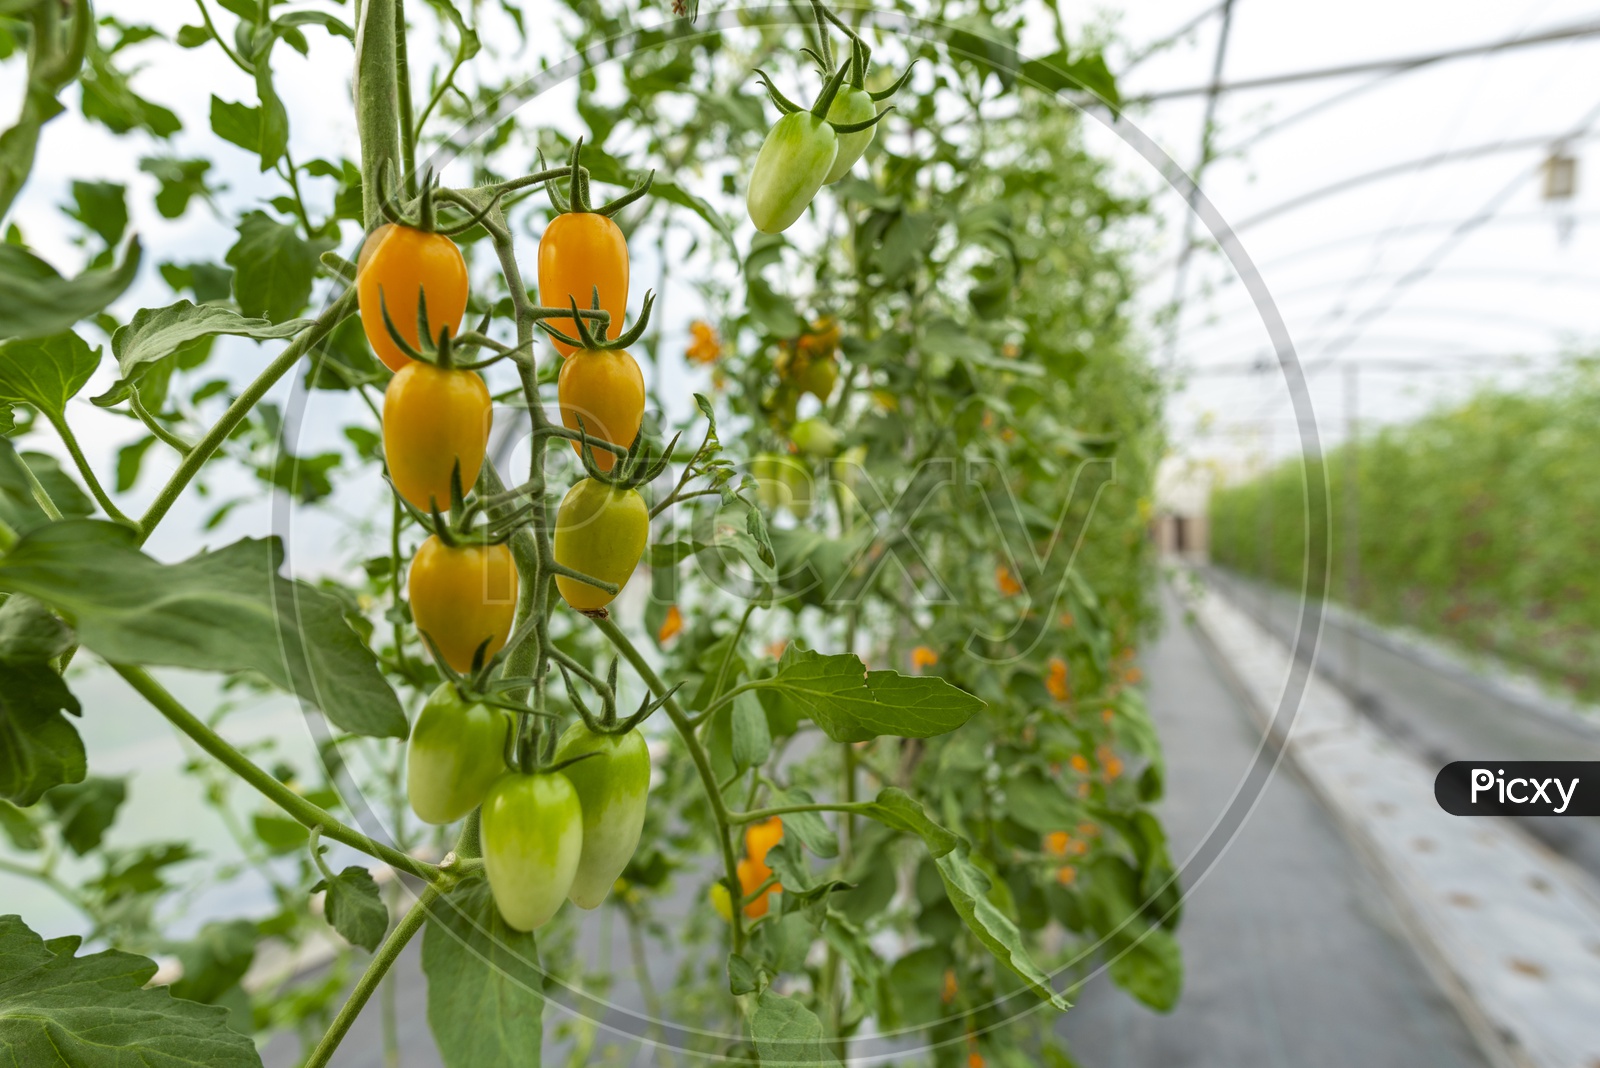 Cultivation Of Tomatoes in Greenhouses